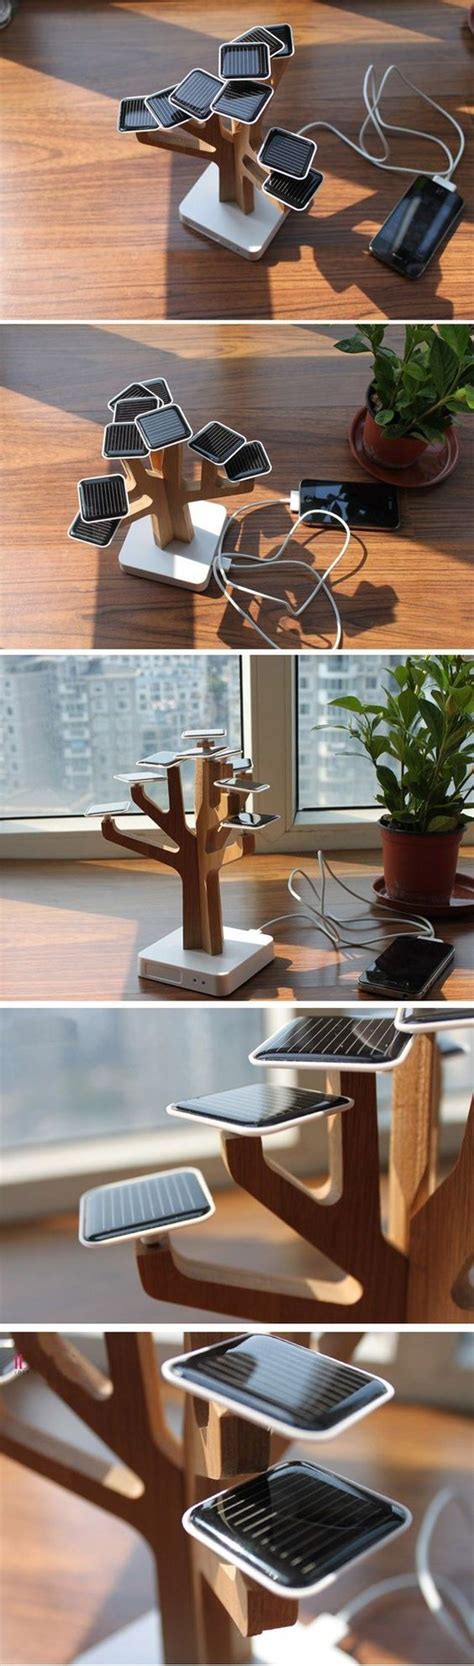 Suntree Solar Charger Inspired By Nature Getdatgadget Solar